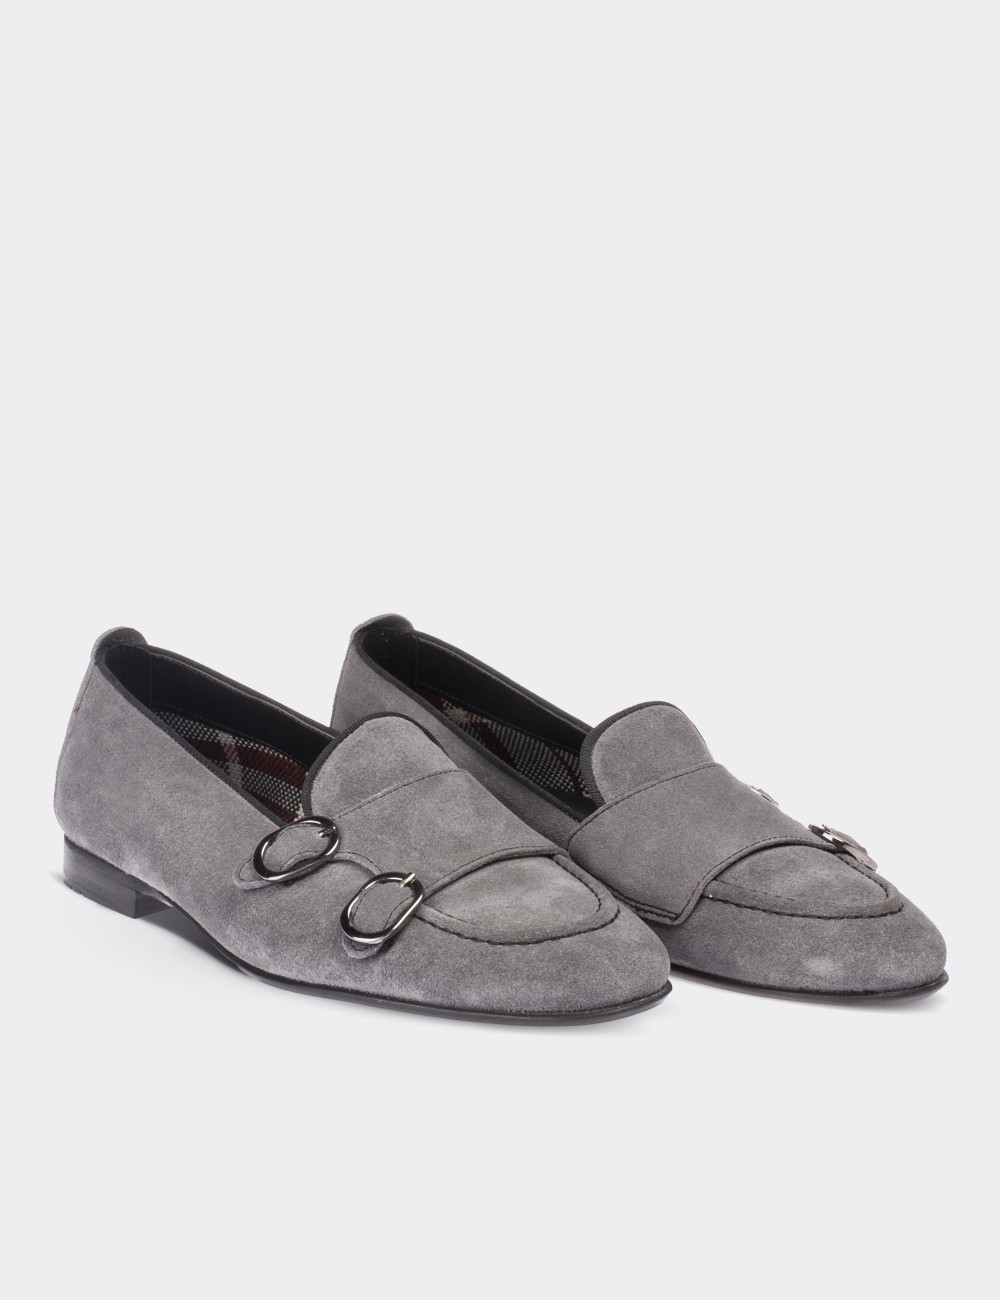 Gray Suede Leather Loafers - 01617ZGRIM01